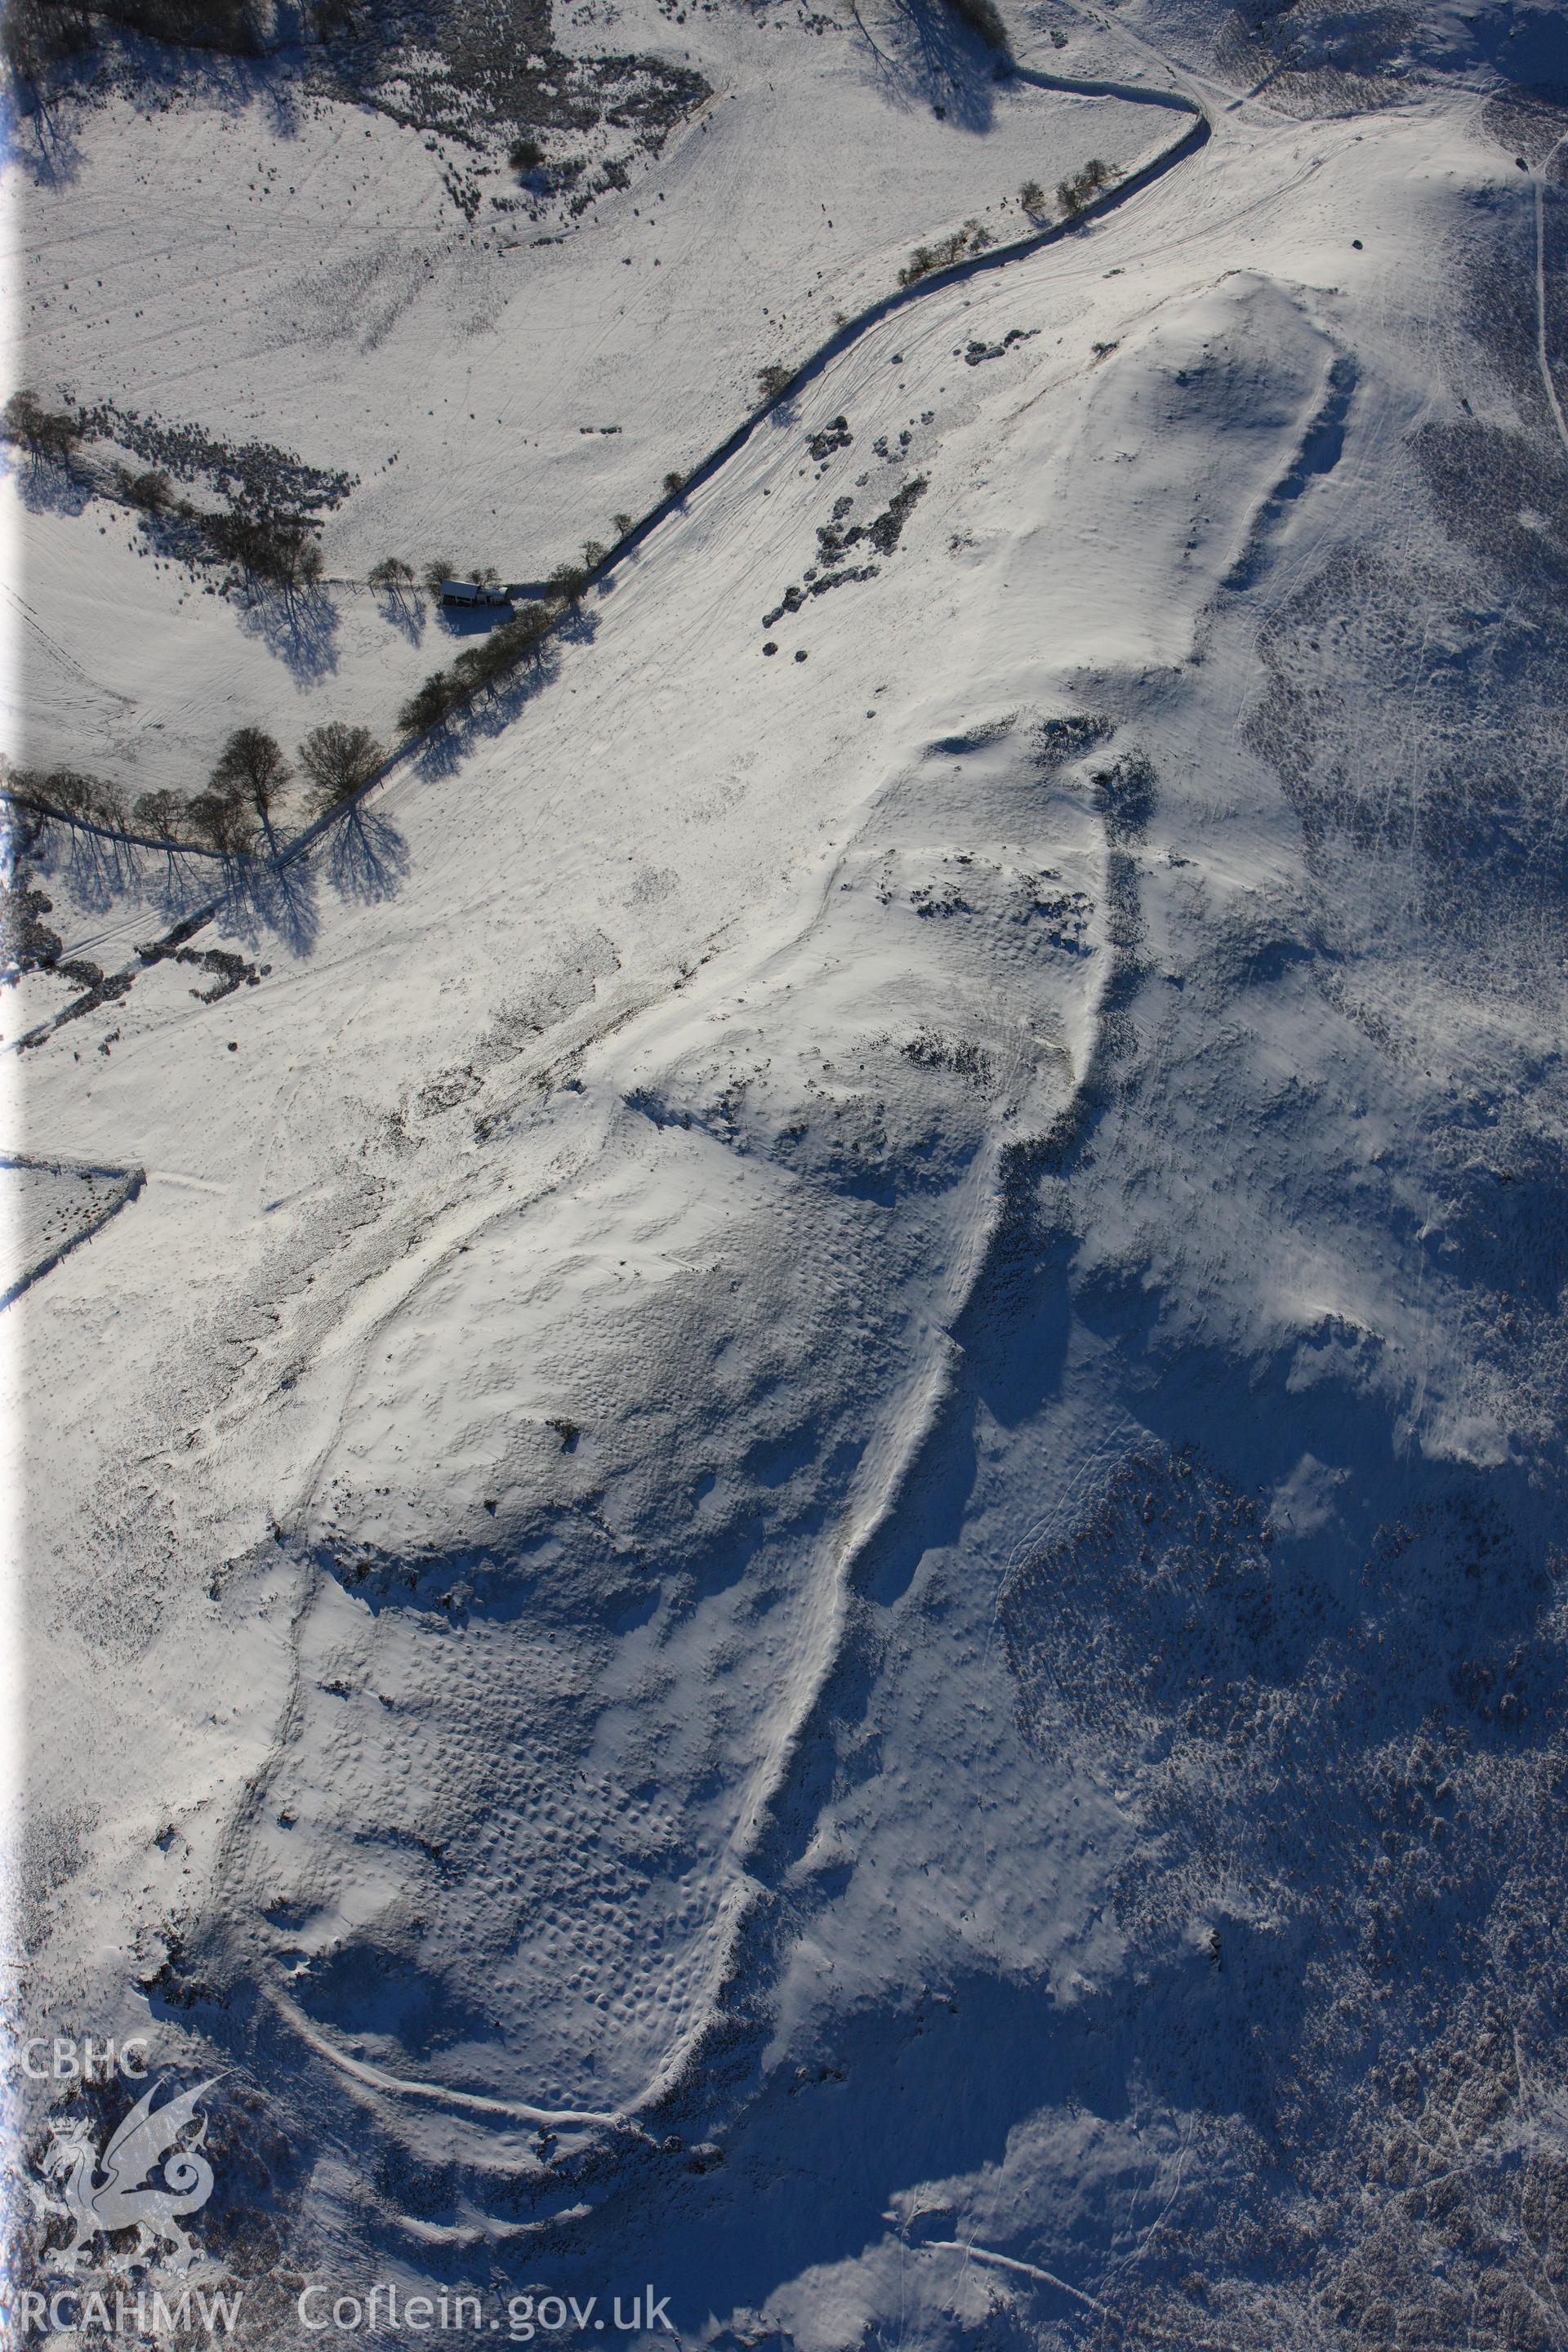 Castle Bank hillfort under snow, north east of Builth Wells. Oblique aerial photograph taken during the Royal Commission?s programme of archaeological aerial reconnaissance by Toby Driver on 15th January 2013.